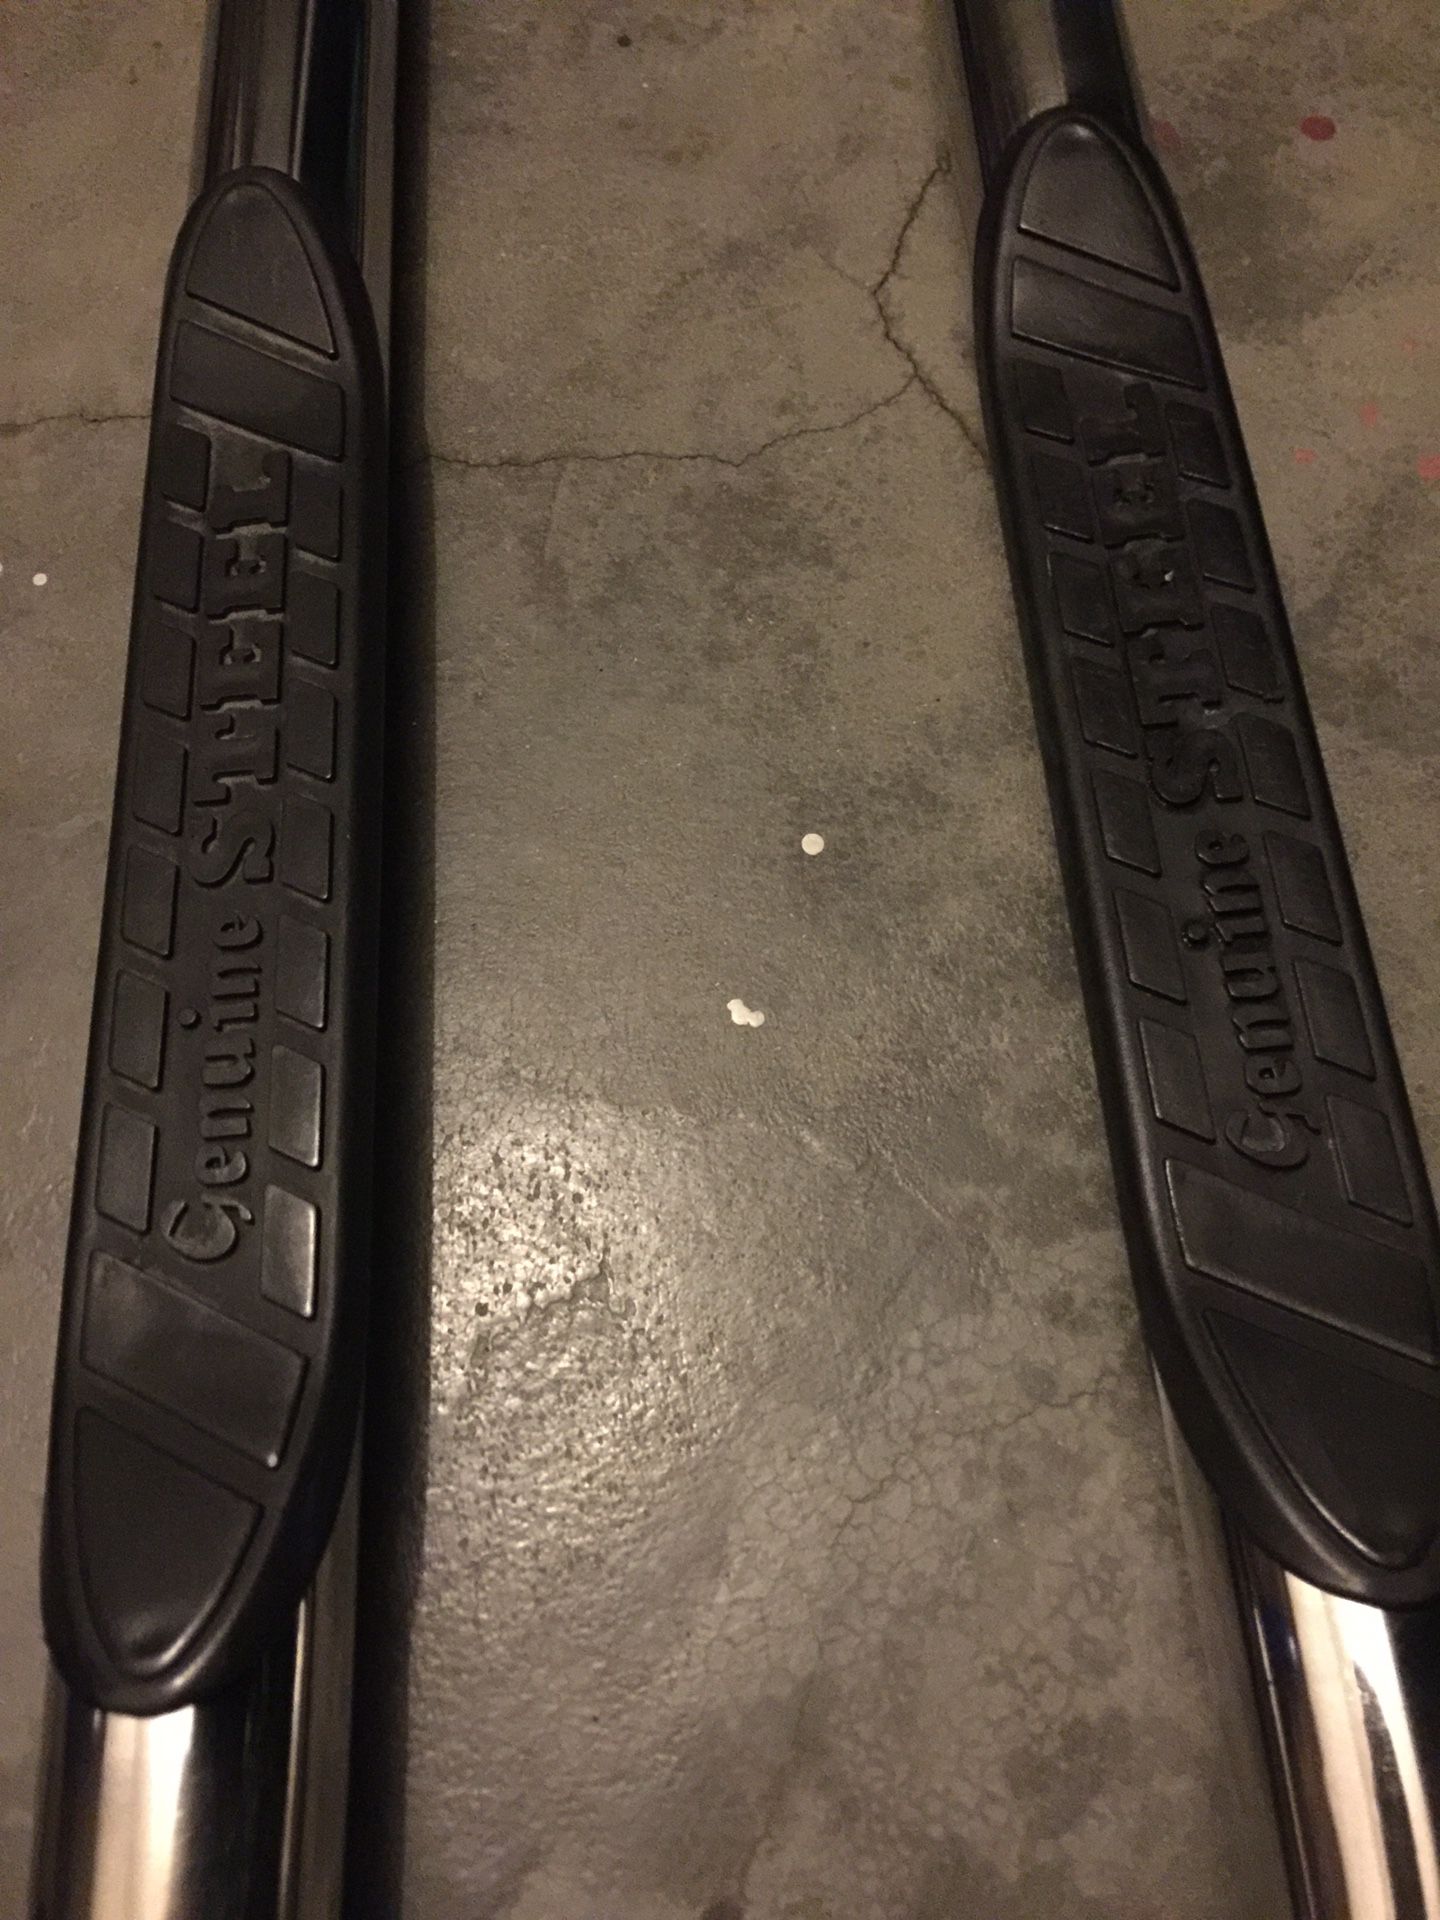 I am selling these 2000 Chevrolet Tahoe running boards